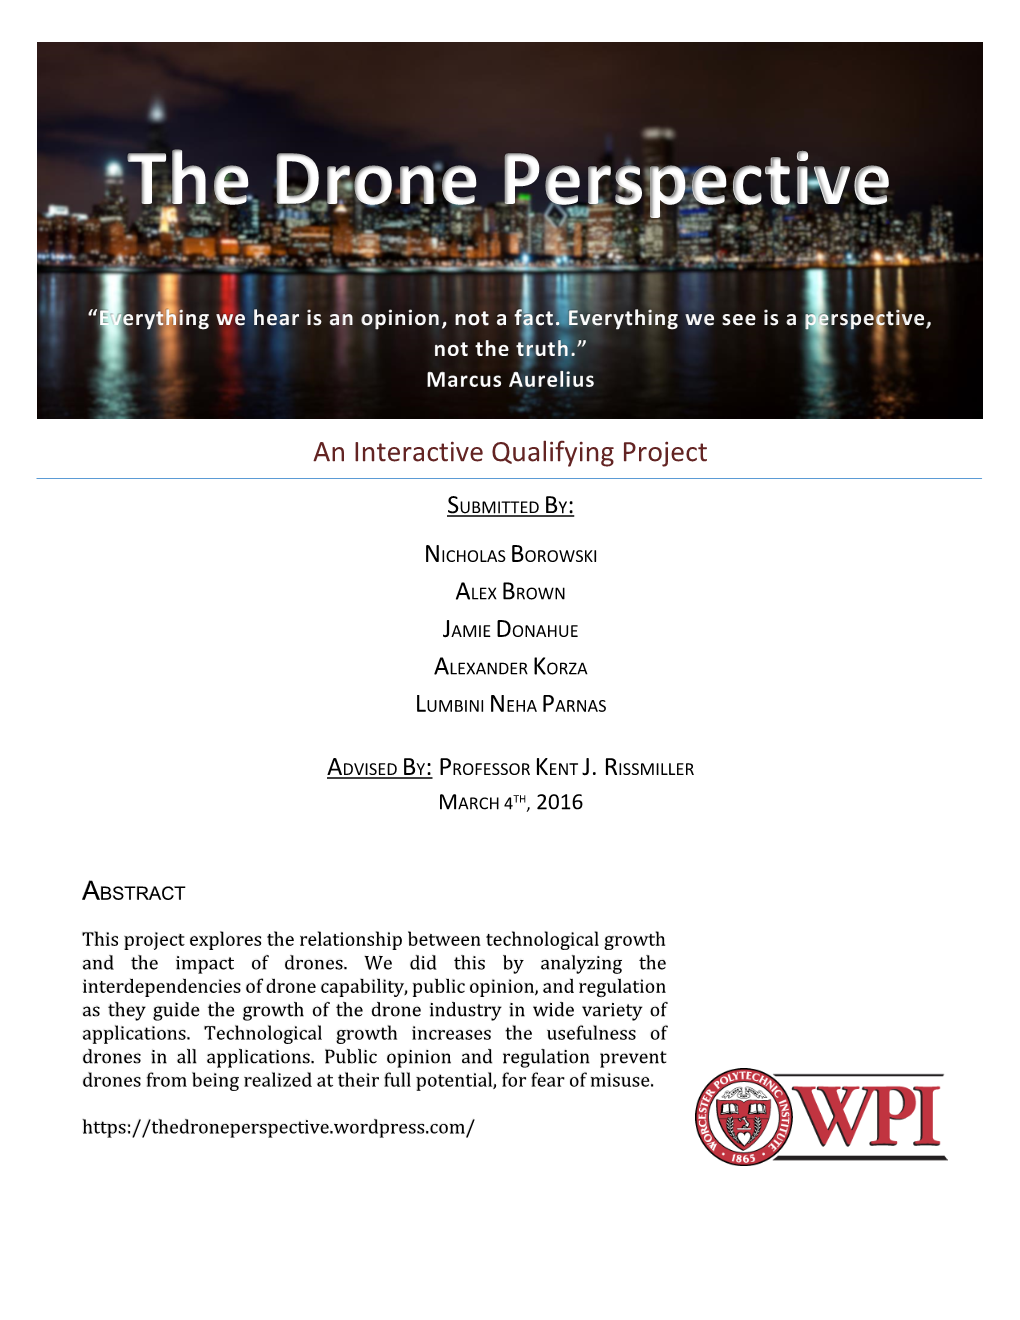 The Drone Perspective